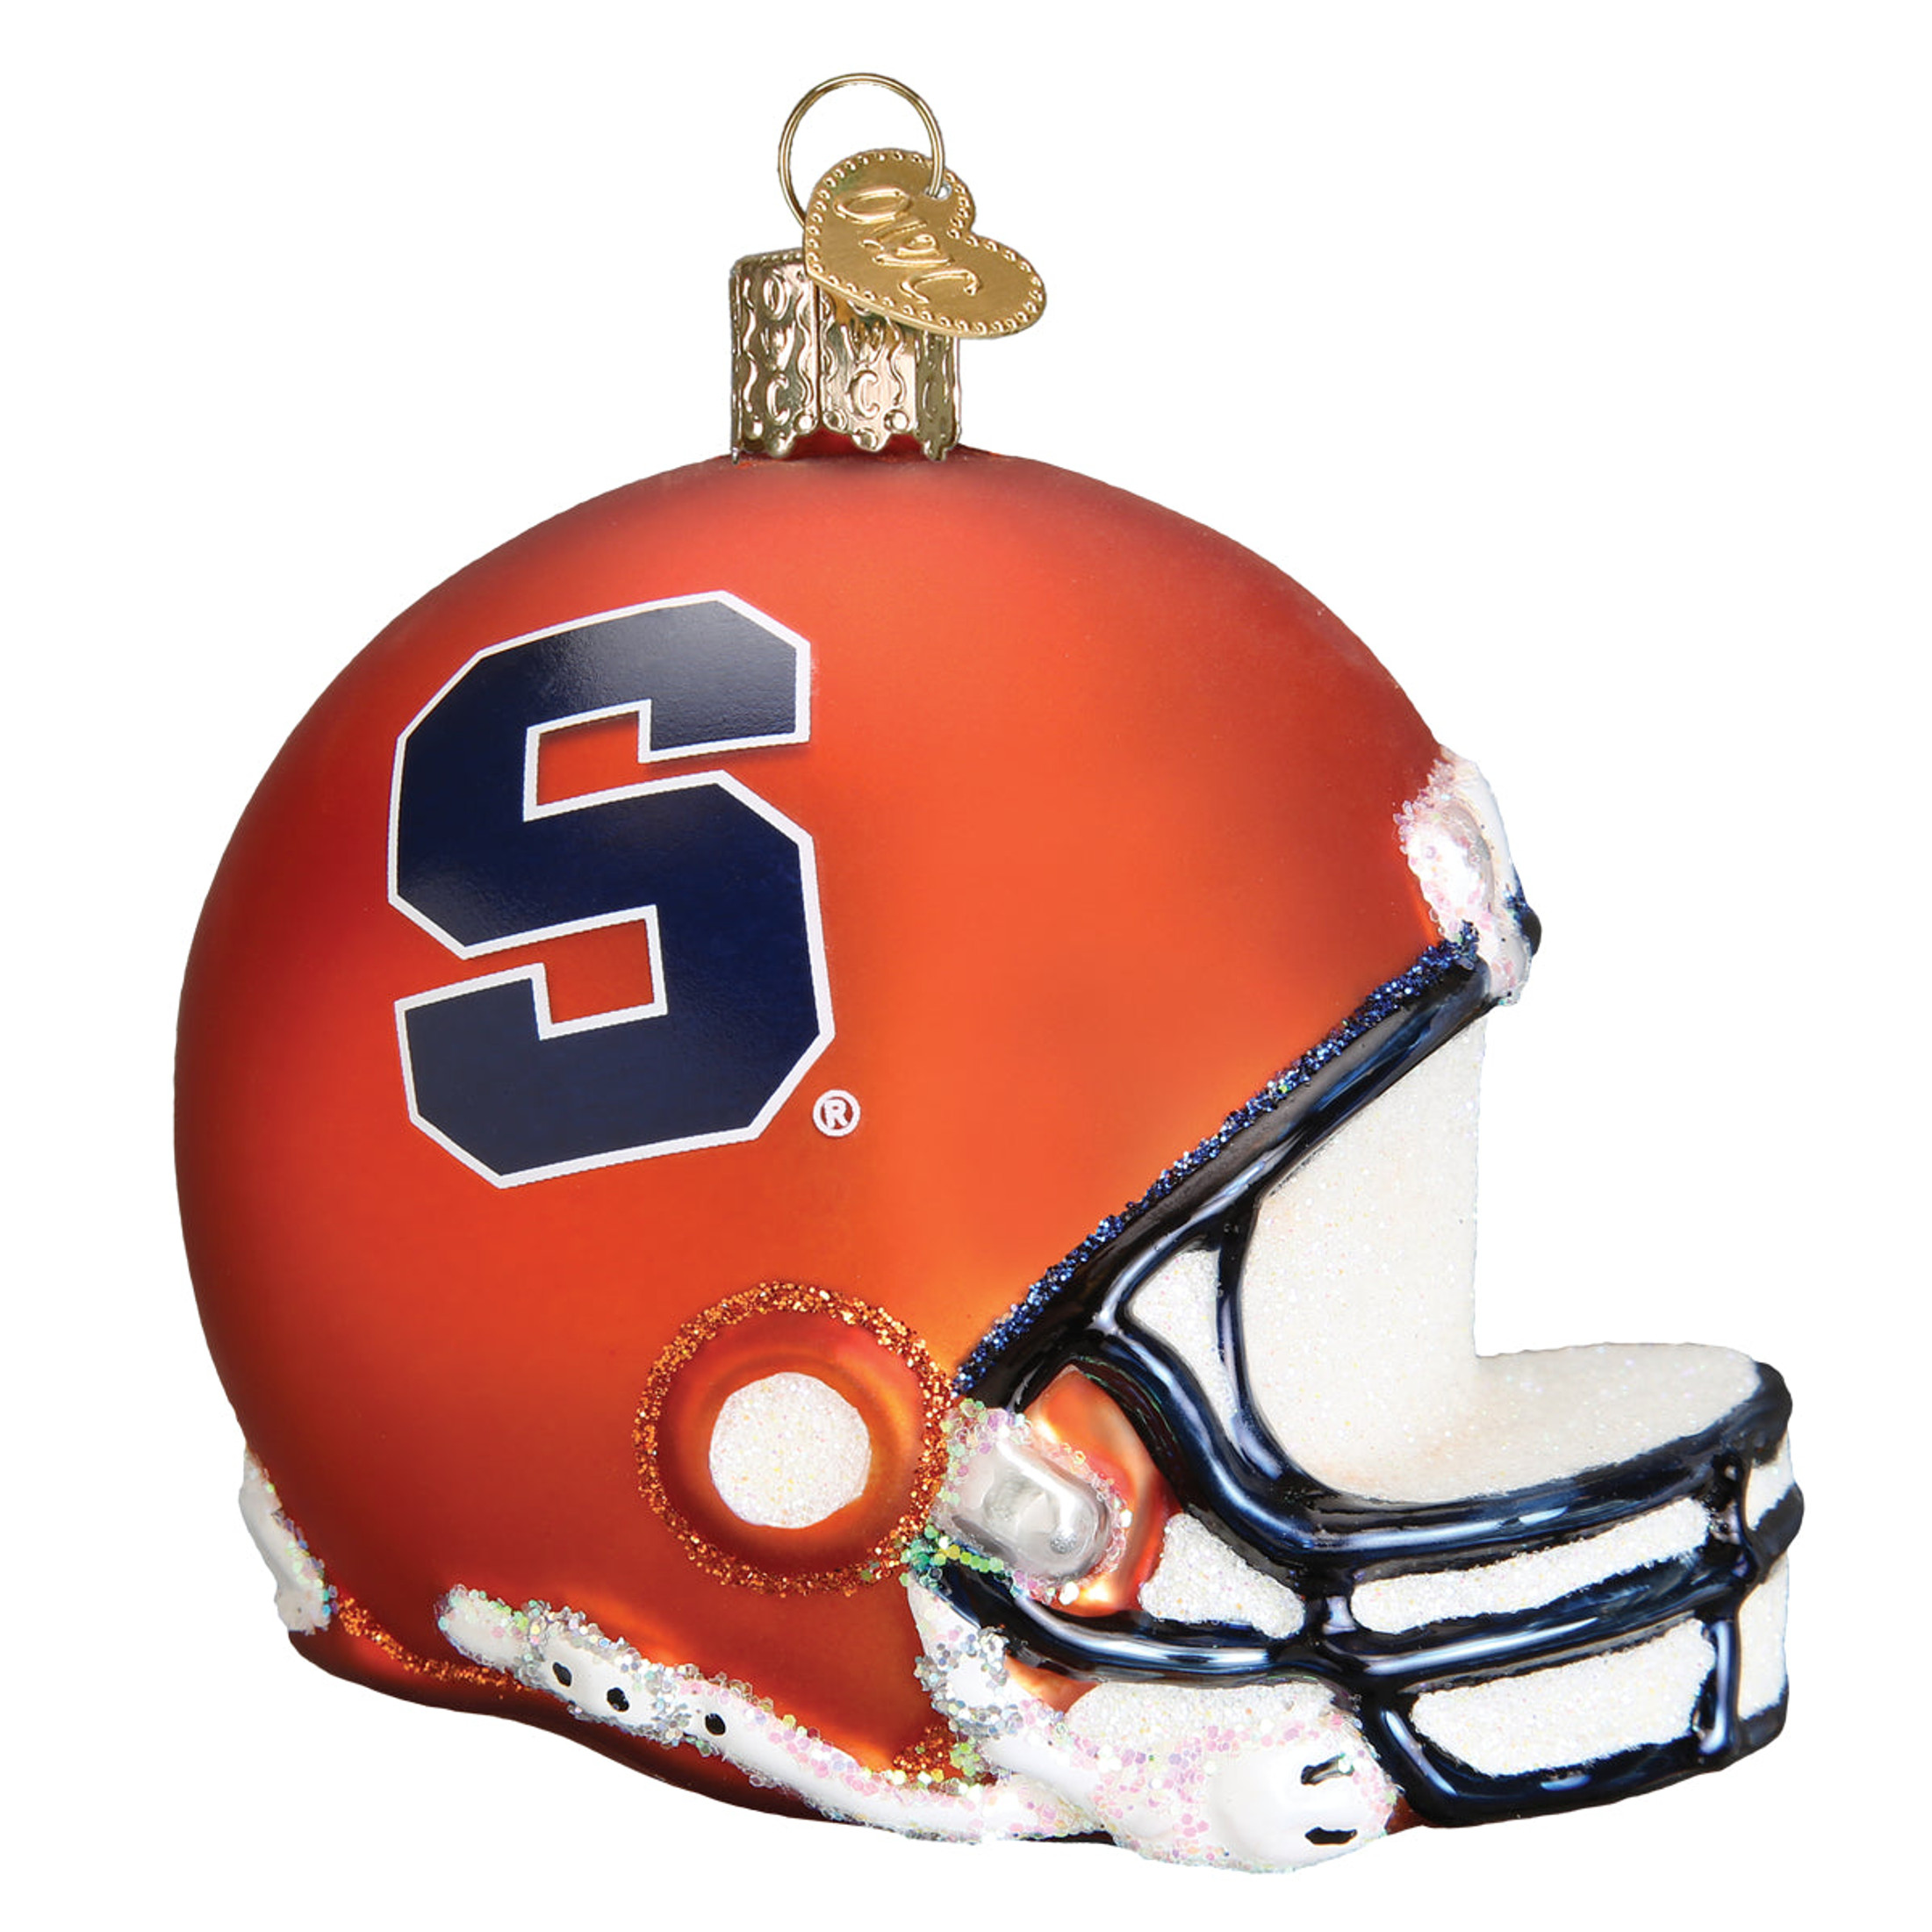 Old World Christmas Glass Blown Tree Ornament, Syracuse University Football Helmet (With OWC Gift Box)